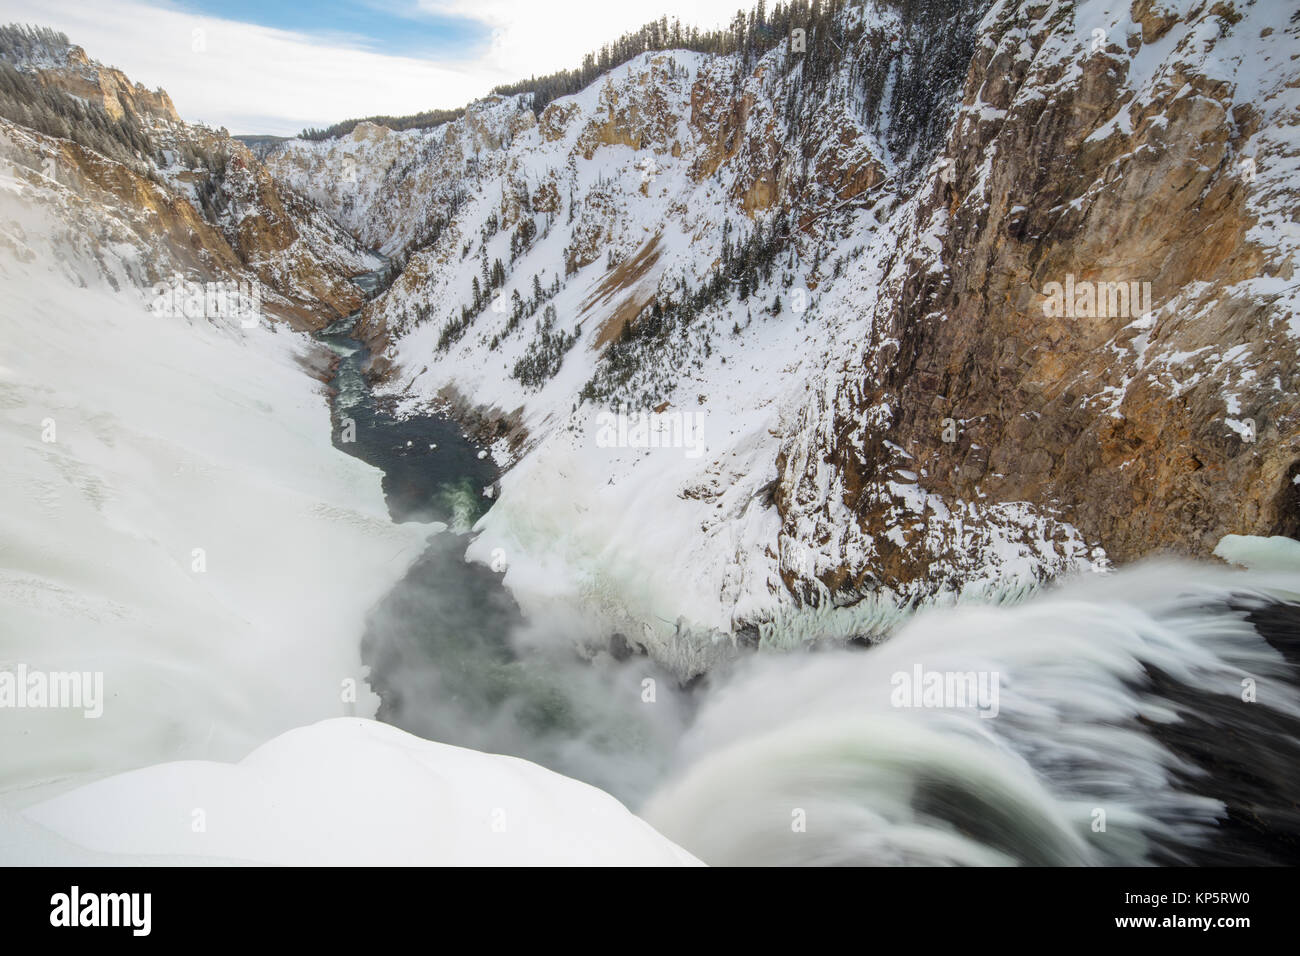 Snow covers the banks of the river at the Brink of the Lower Falls waterfall in the Yellowstone National Park Grand Canyon of the Yellowstone in winter November 15, 2017 in Wyoming.  (photo by Jacob W. Frank via Planetpix) Stock Photo